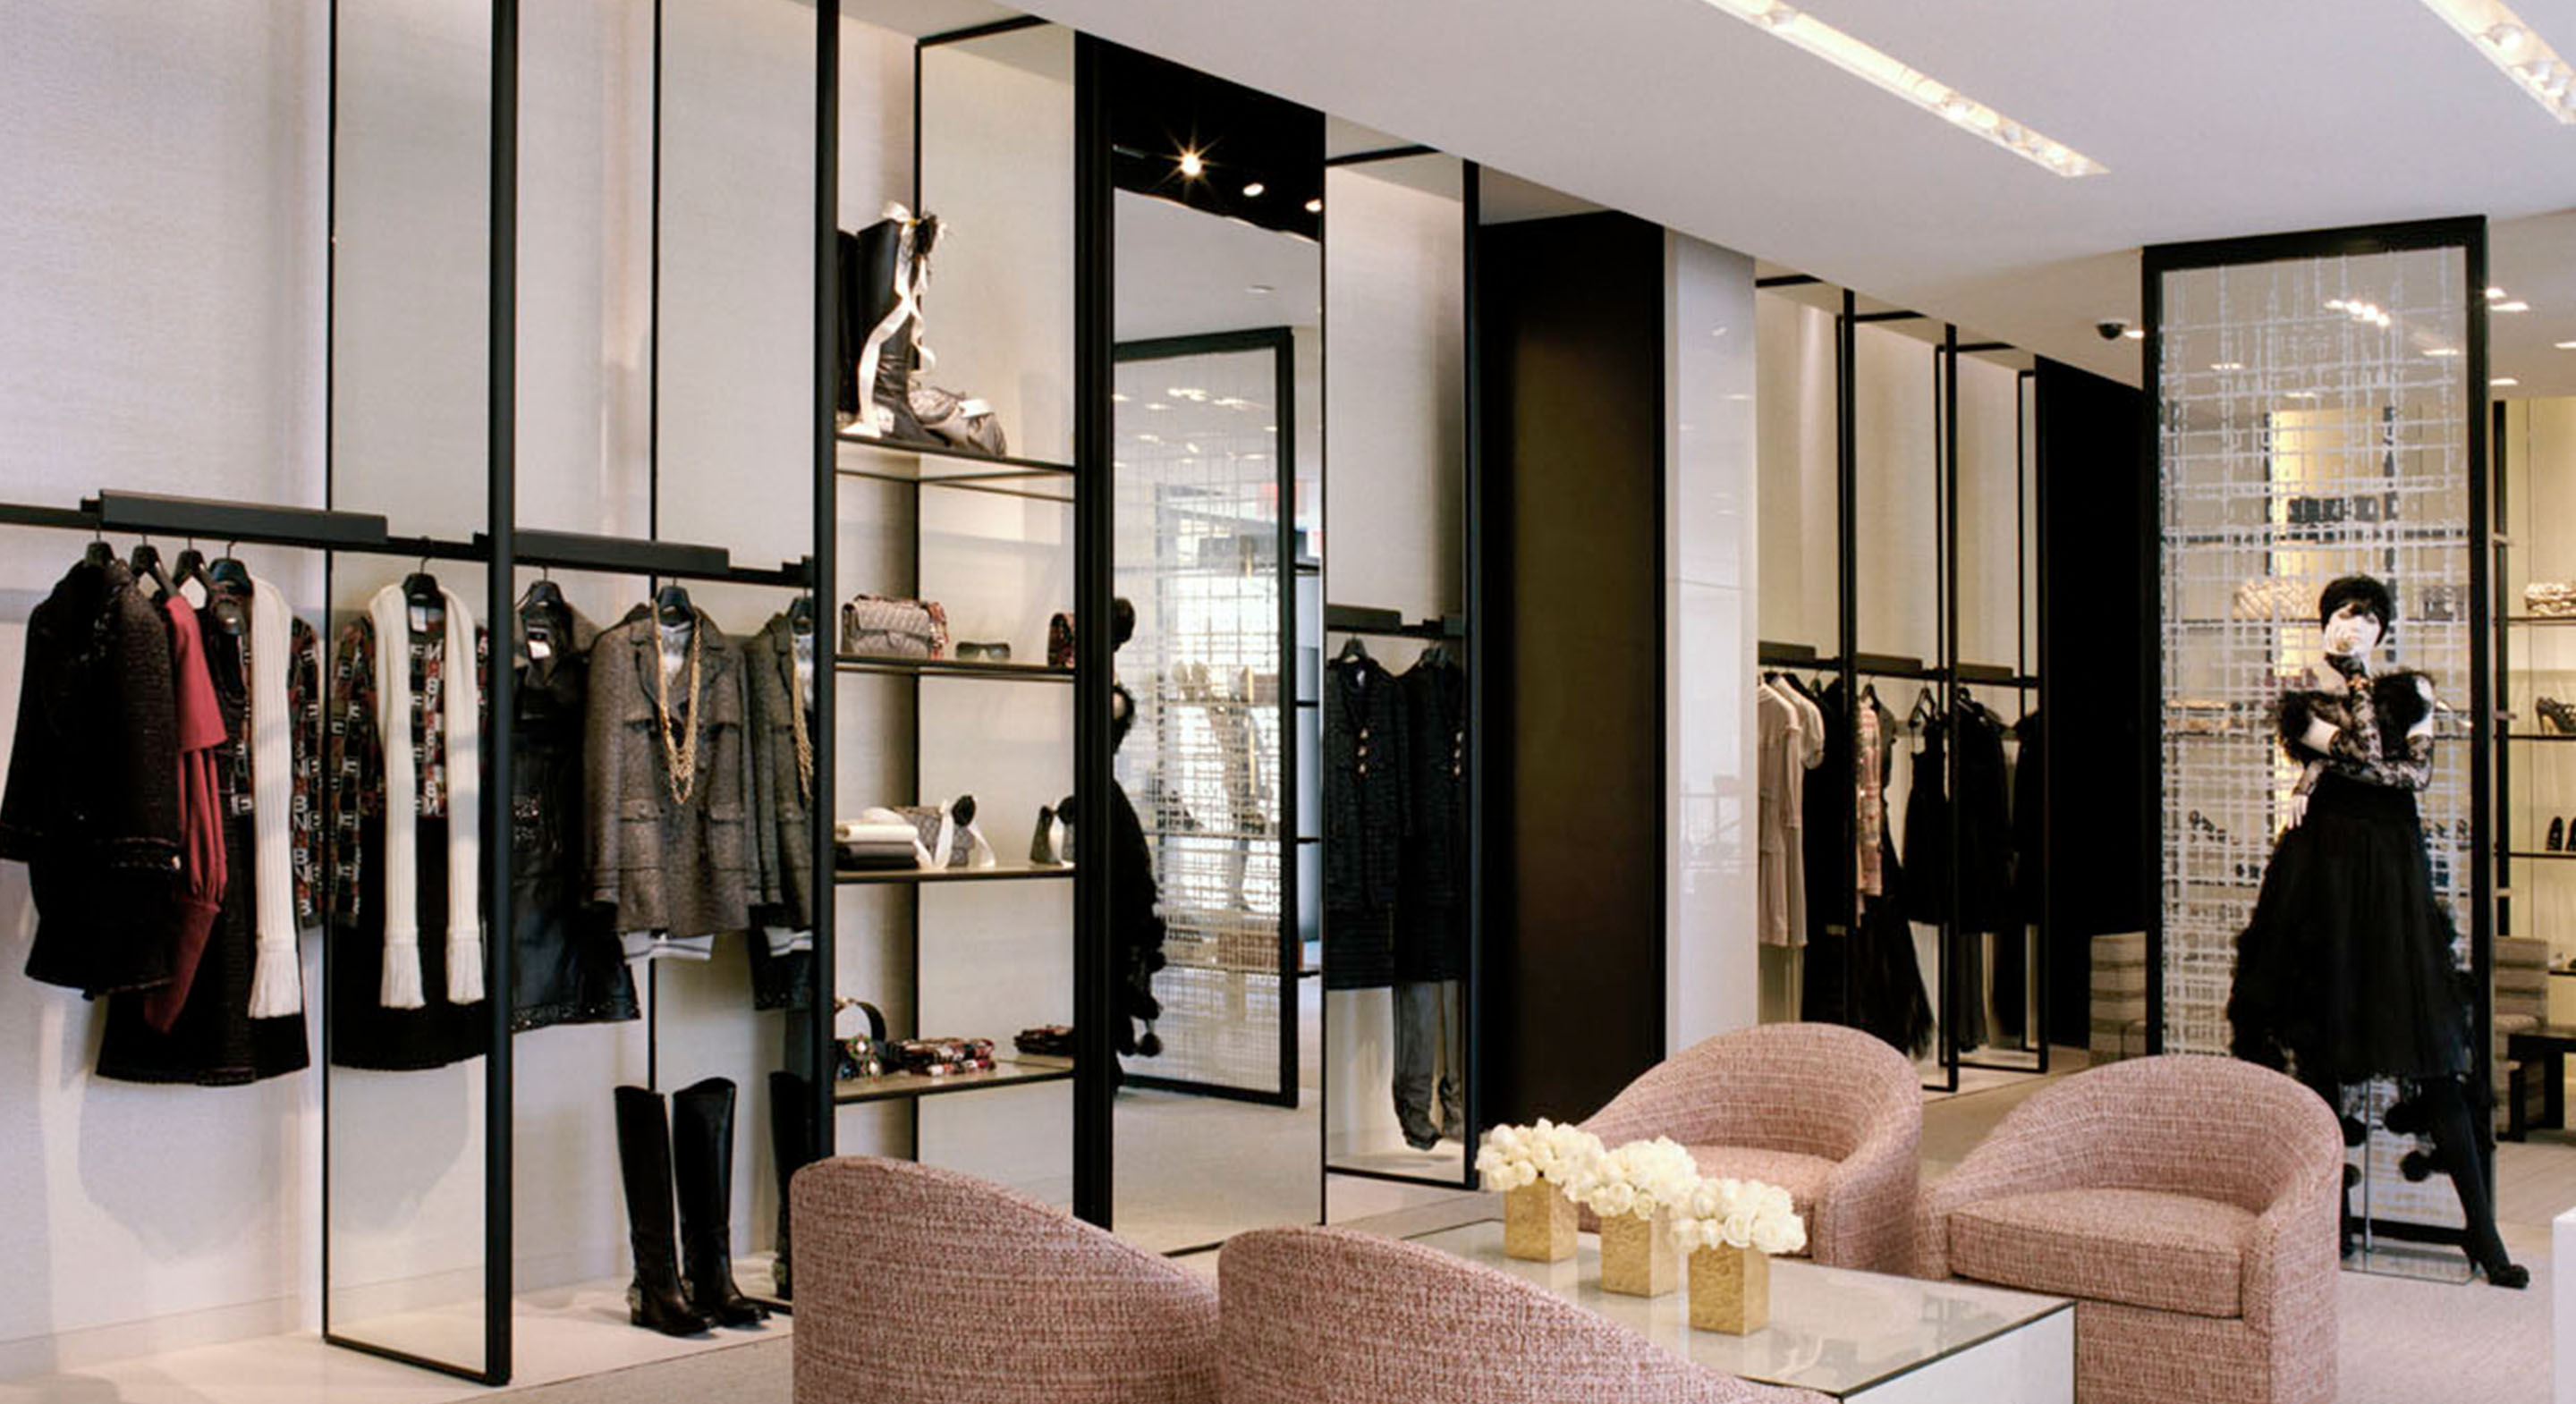 chanel beverly hills boutique